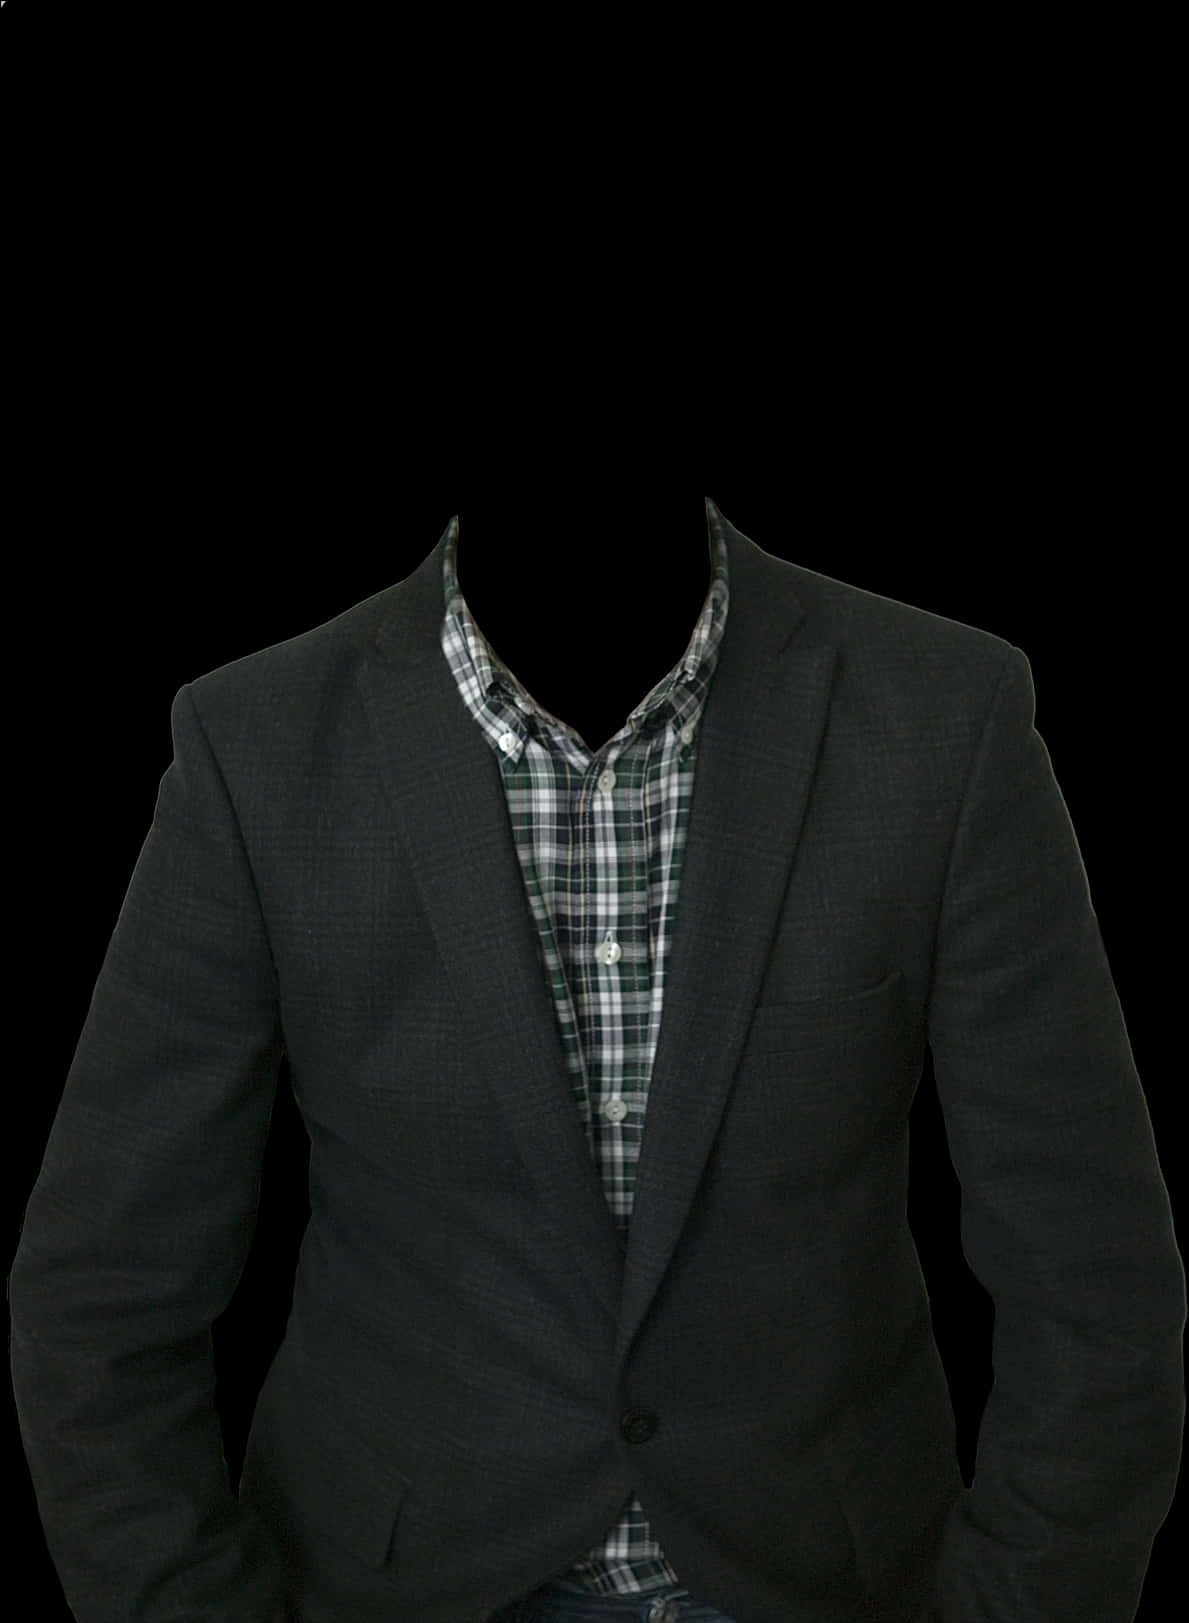 A Person's Body With A Suit